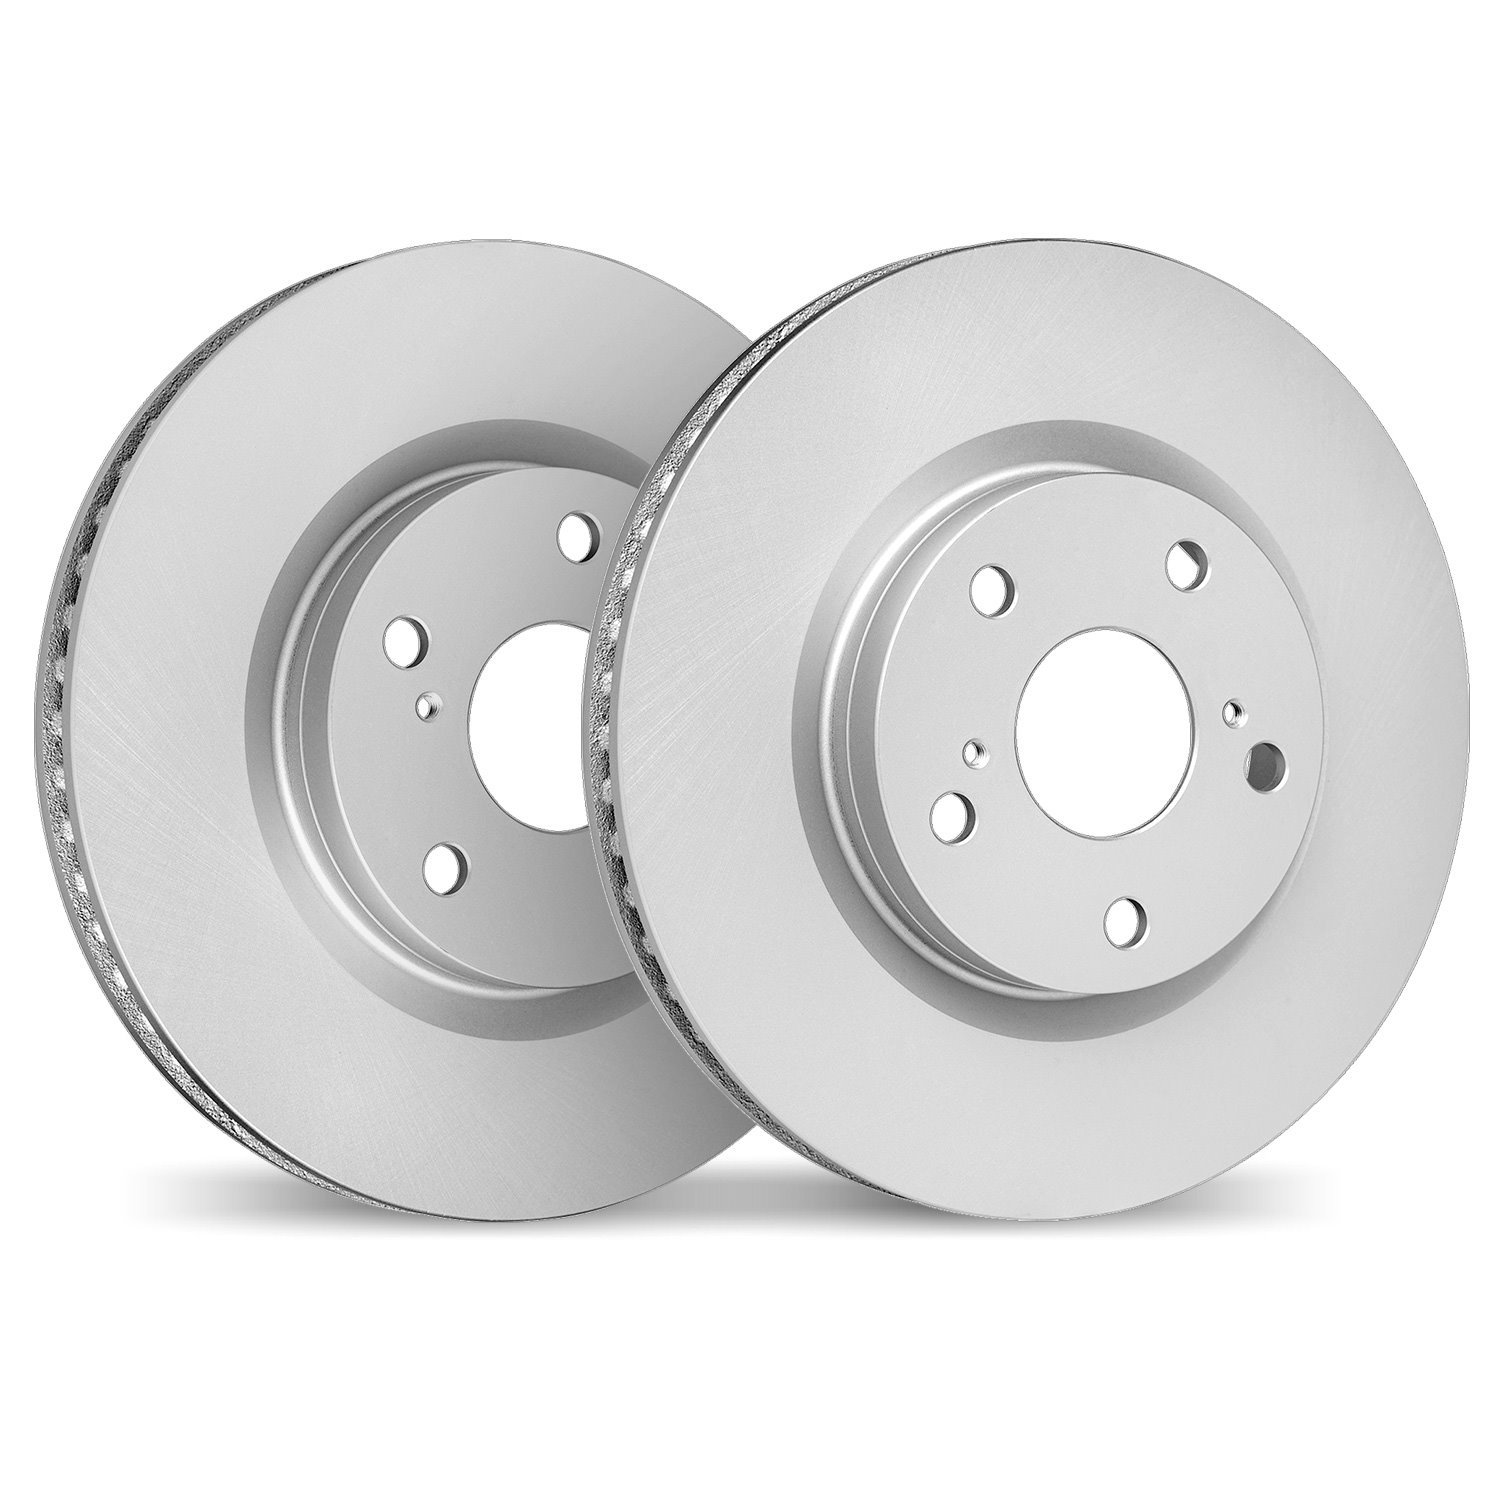 4002-11035 Geospec Brake Rotors, Fits Select Land Rover, Position: Front